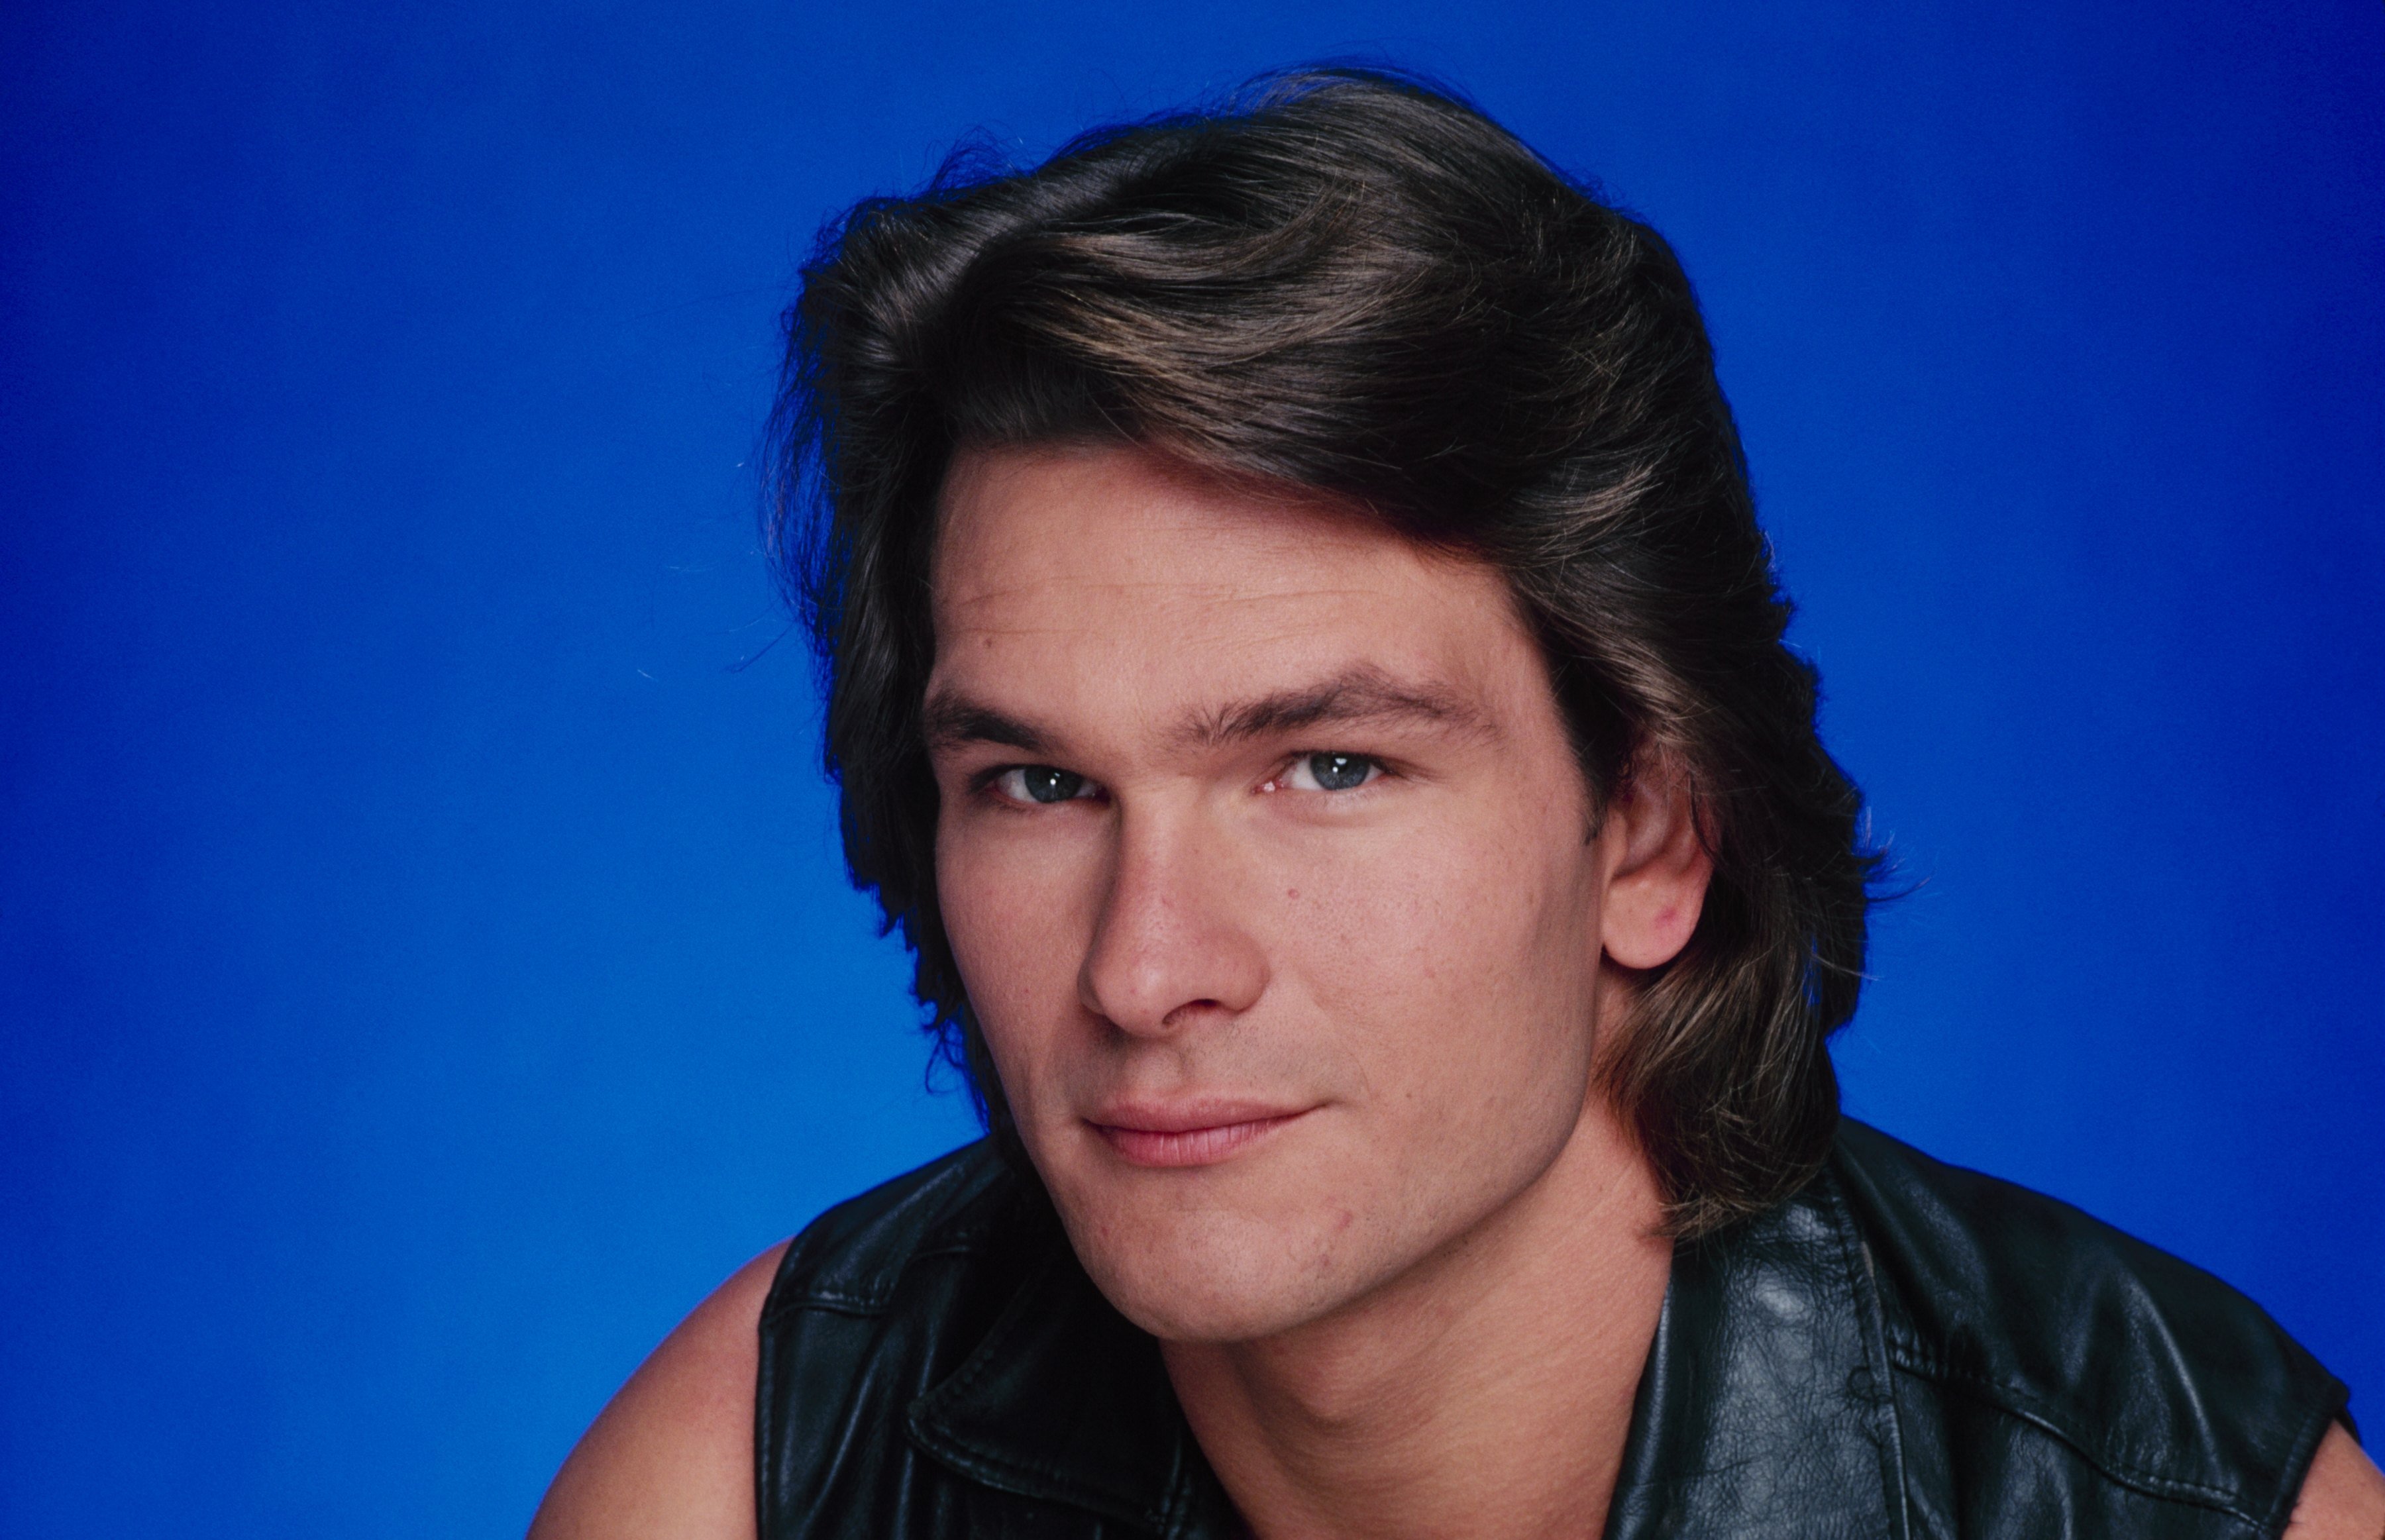 A portrait of the actor Patrick Swayze, in 1982. | Source: Getty Images